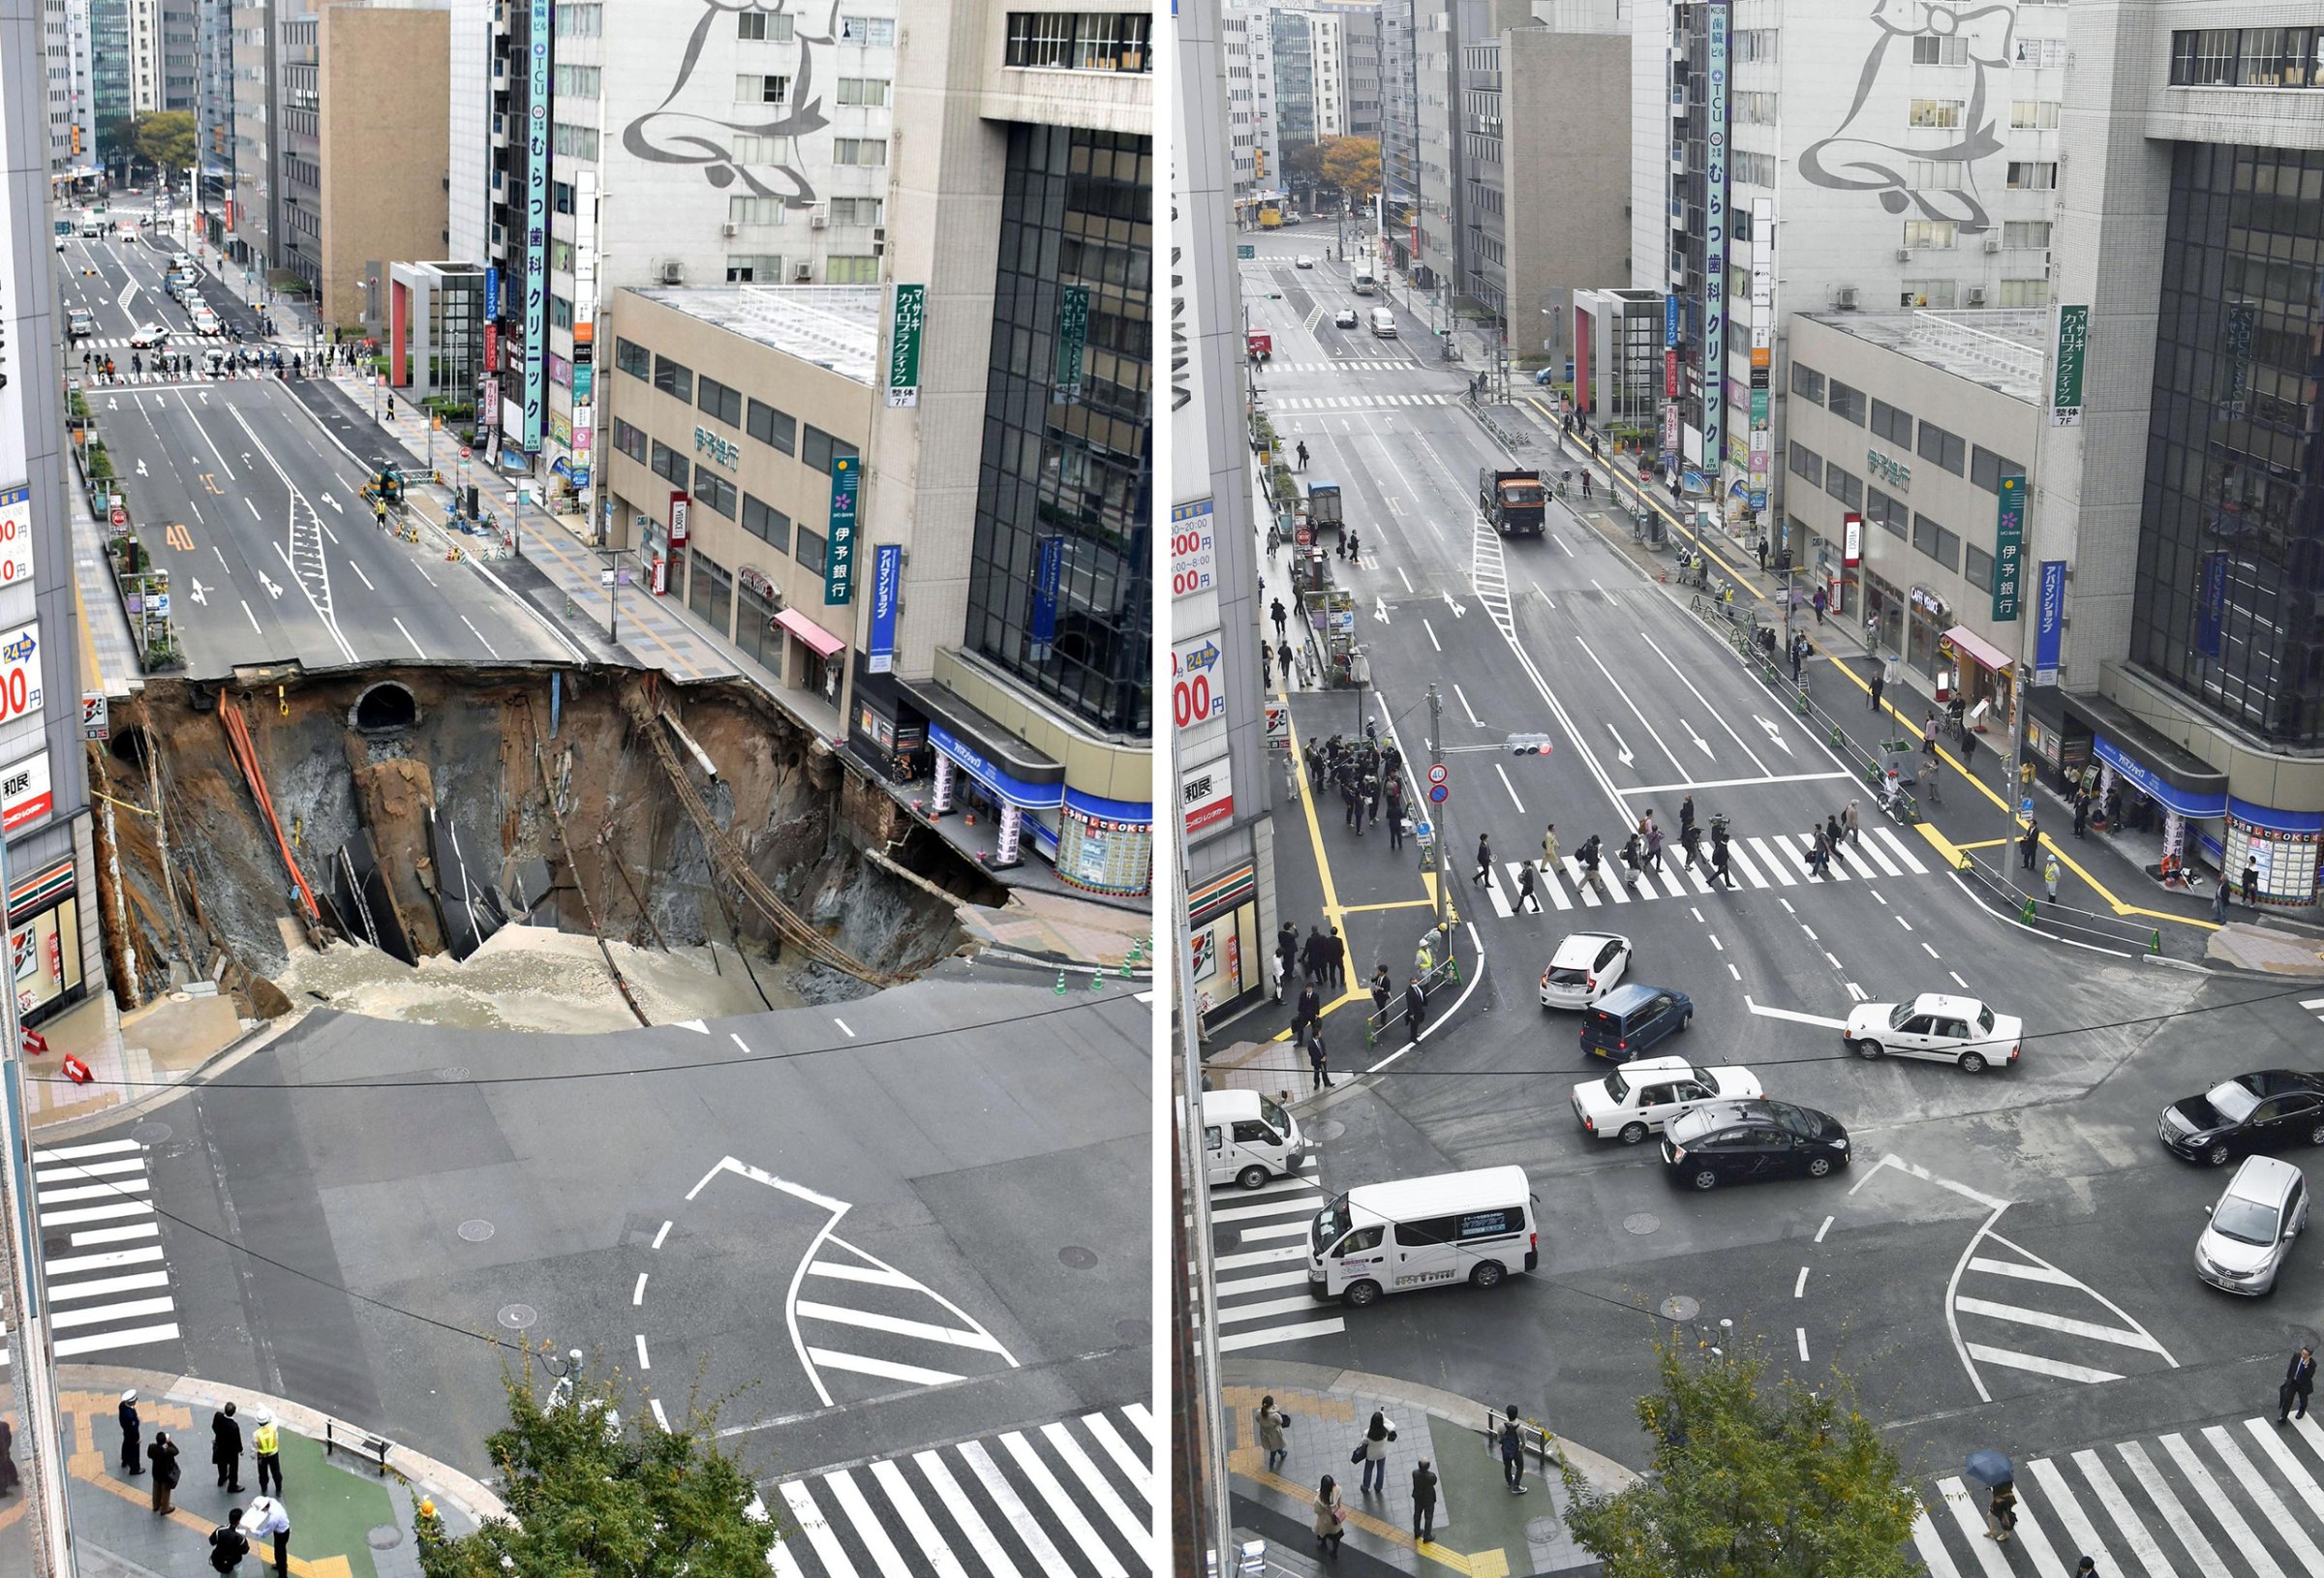 A combination photo shows a sinkhole in Fukuoka, Japan, on Nov. 8, 2016, left, and fixed a week later on Nov. 15, 2016.